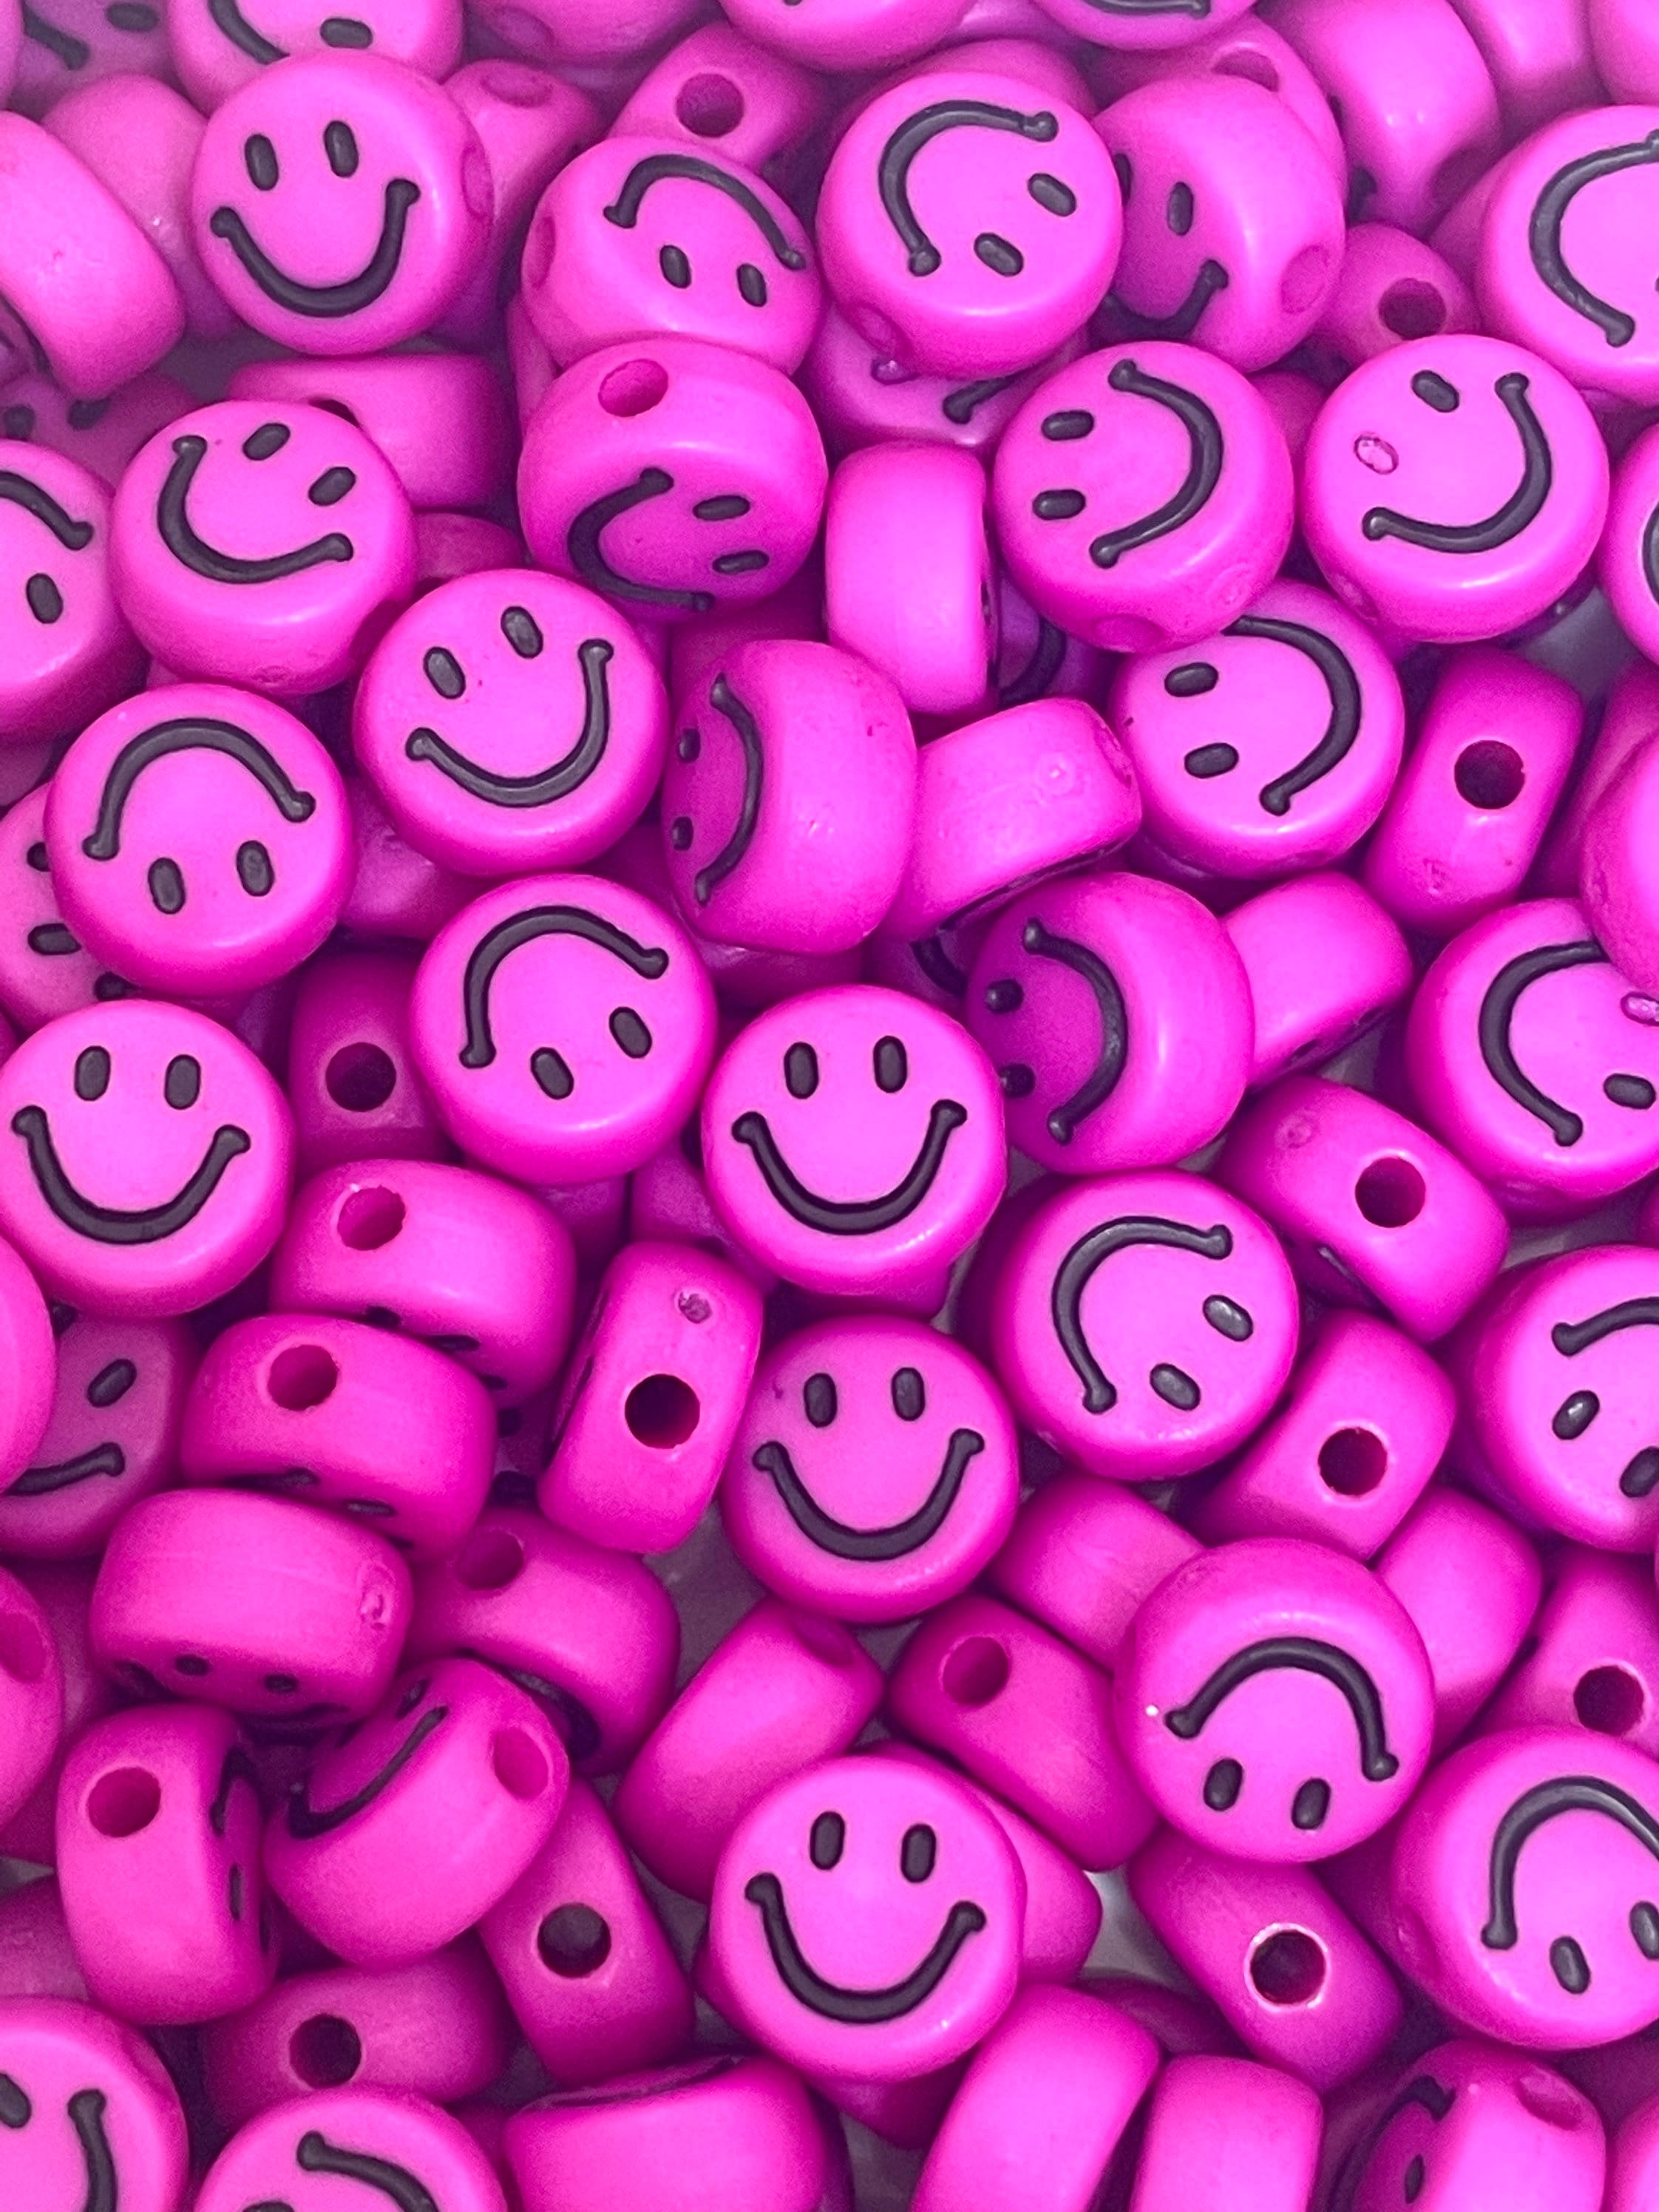 Cute Bright Pink Emoji Beads Smiley Face Charm Happy Face